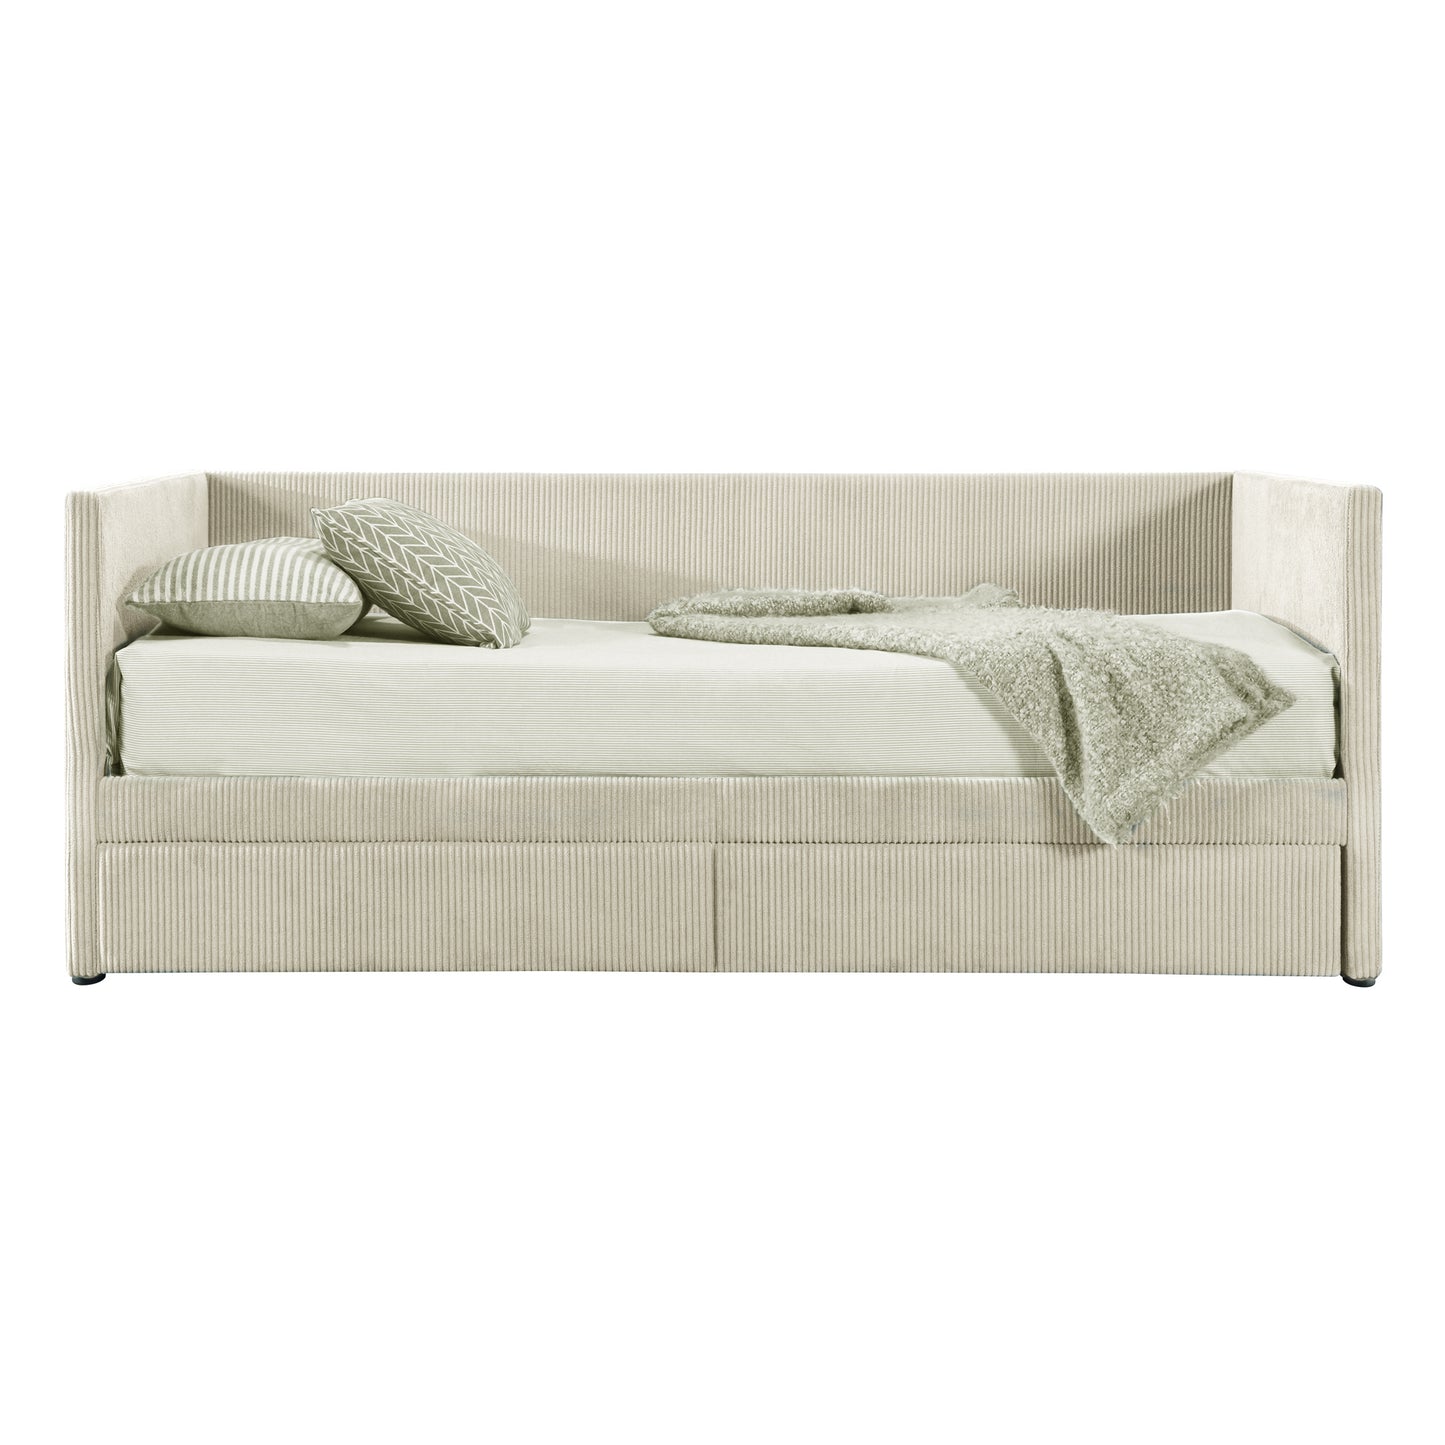 Twin Size Corduroy Daybed with Two Drawers and Wood Slat, Beige